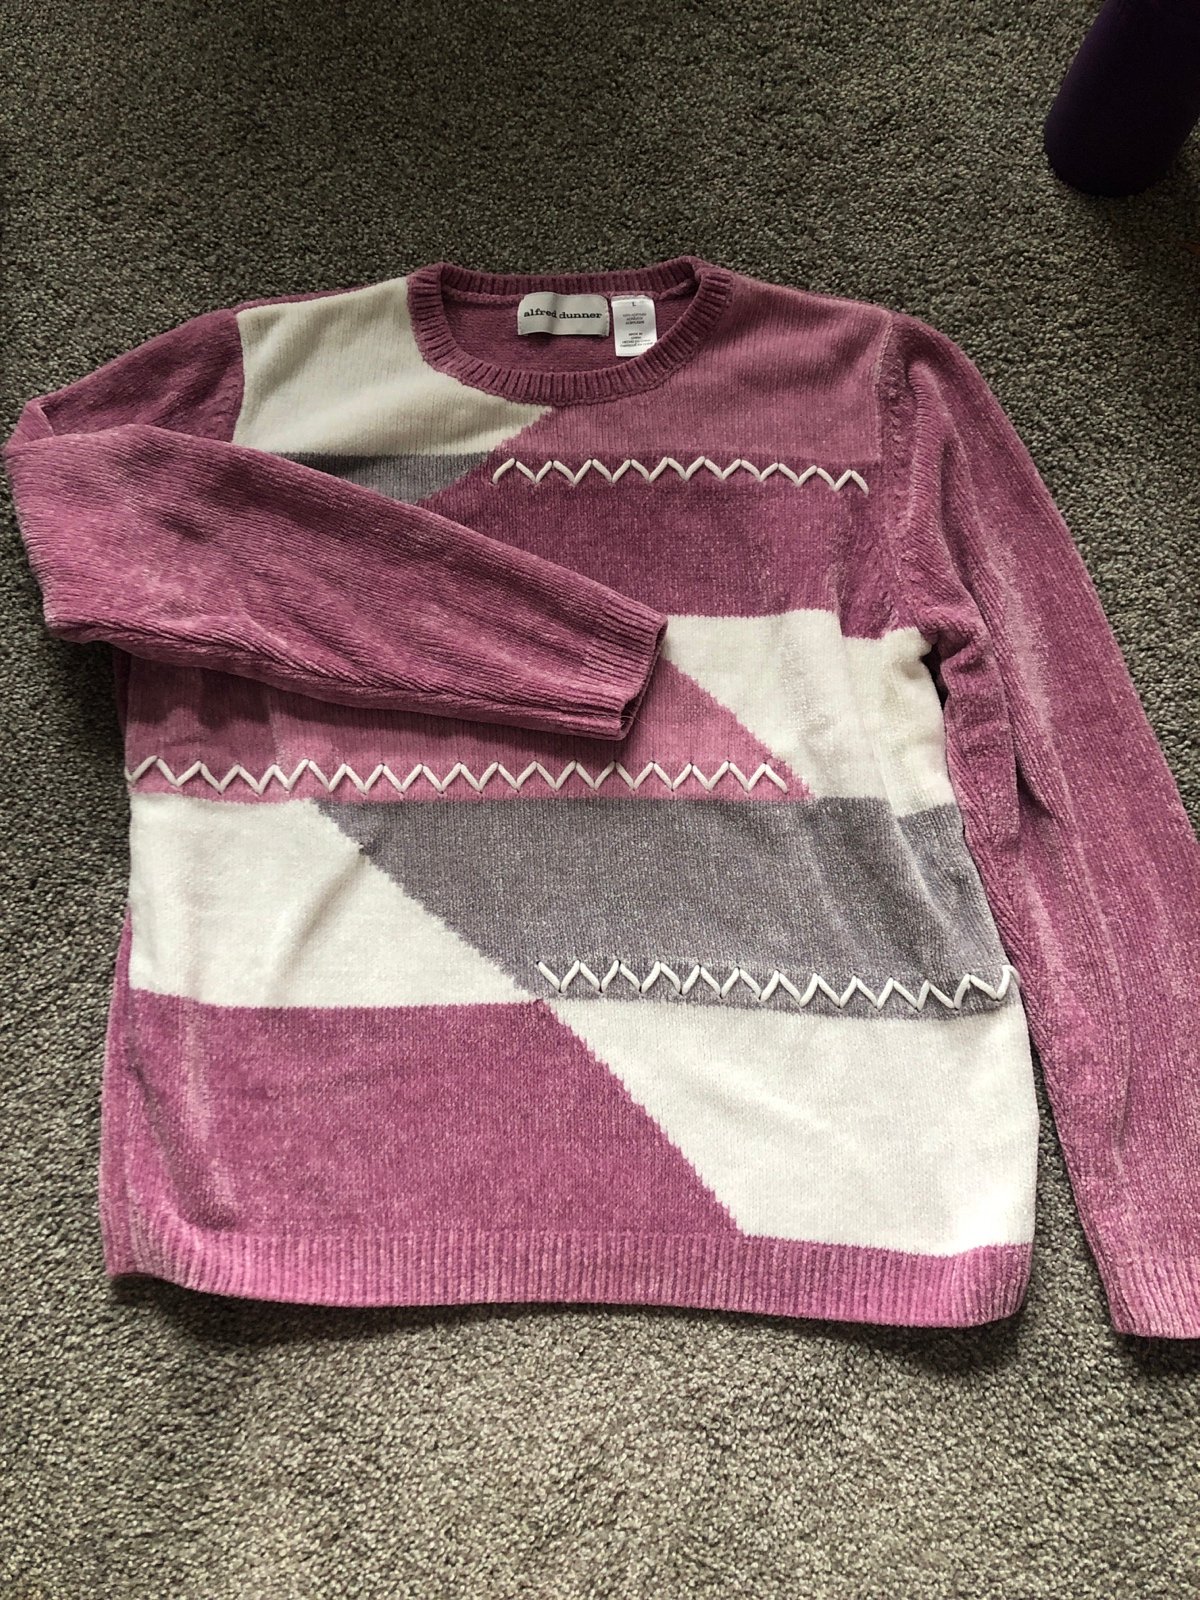 The Best Seller Alfred Dunner Vintage Purple Sweater with White Lacing Size L fNlbEhQ2a US Sale